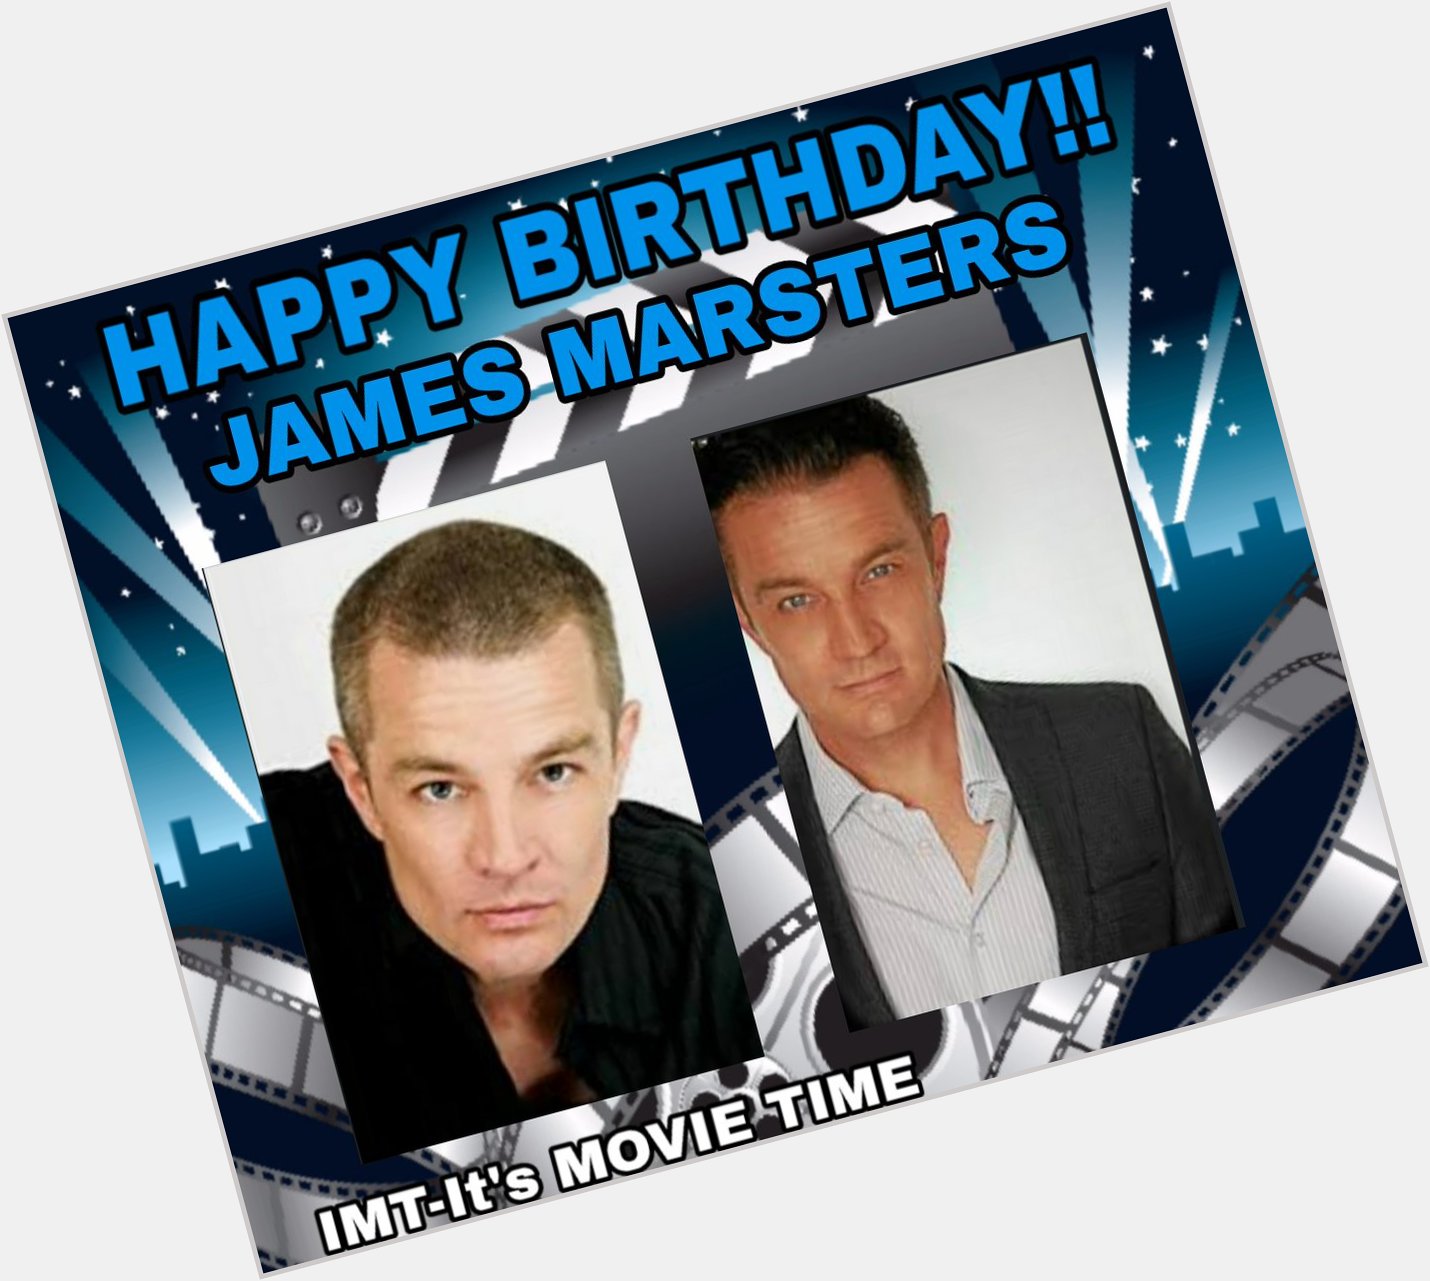 Happy Birthday to James Marsters! The actor is celebrating 58 years. 